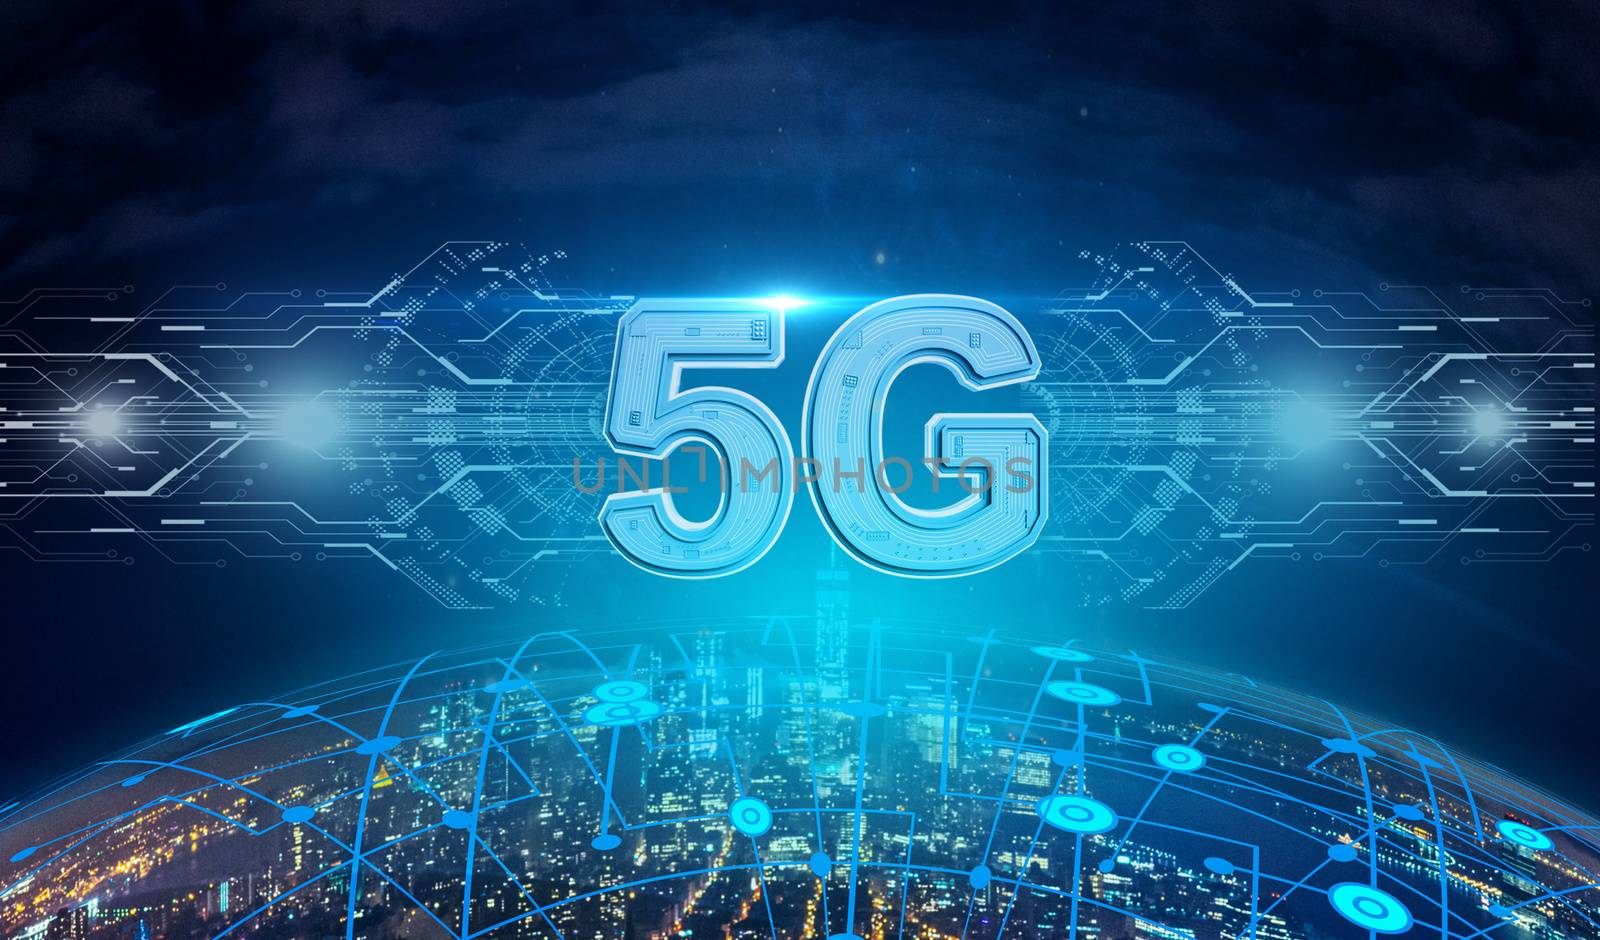 The concept of 5G network, new generation networks. high-speed mobile Internet, Business, modern technology, internet and networking concept. 3D illustration.